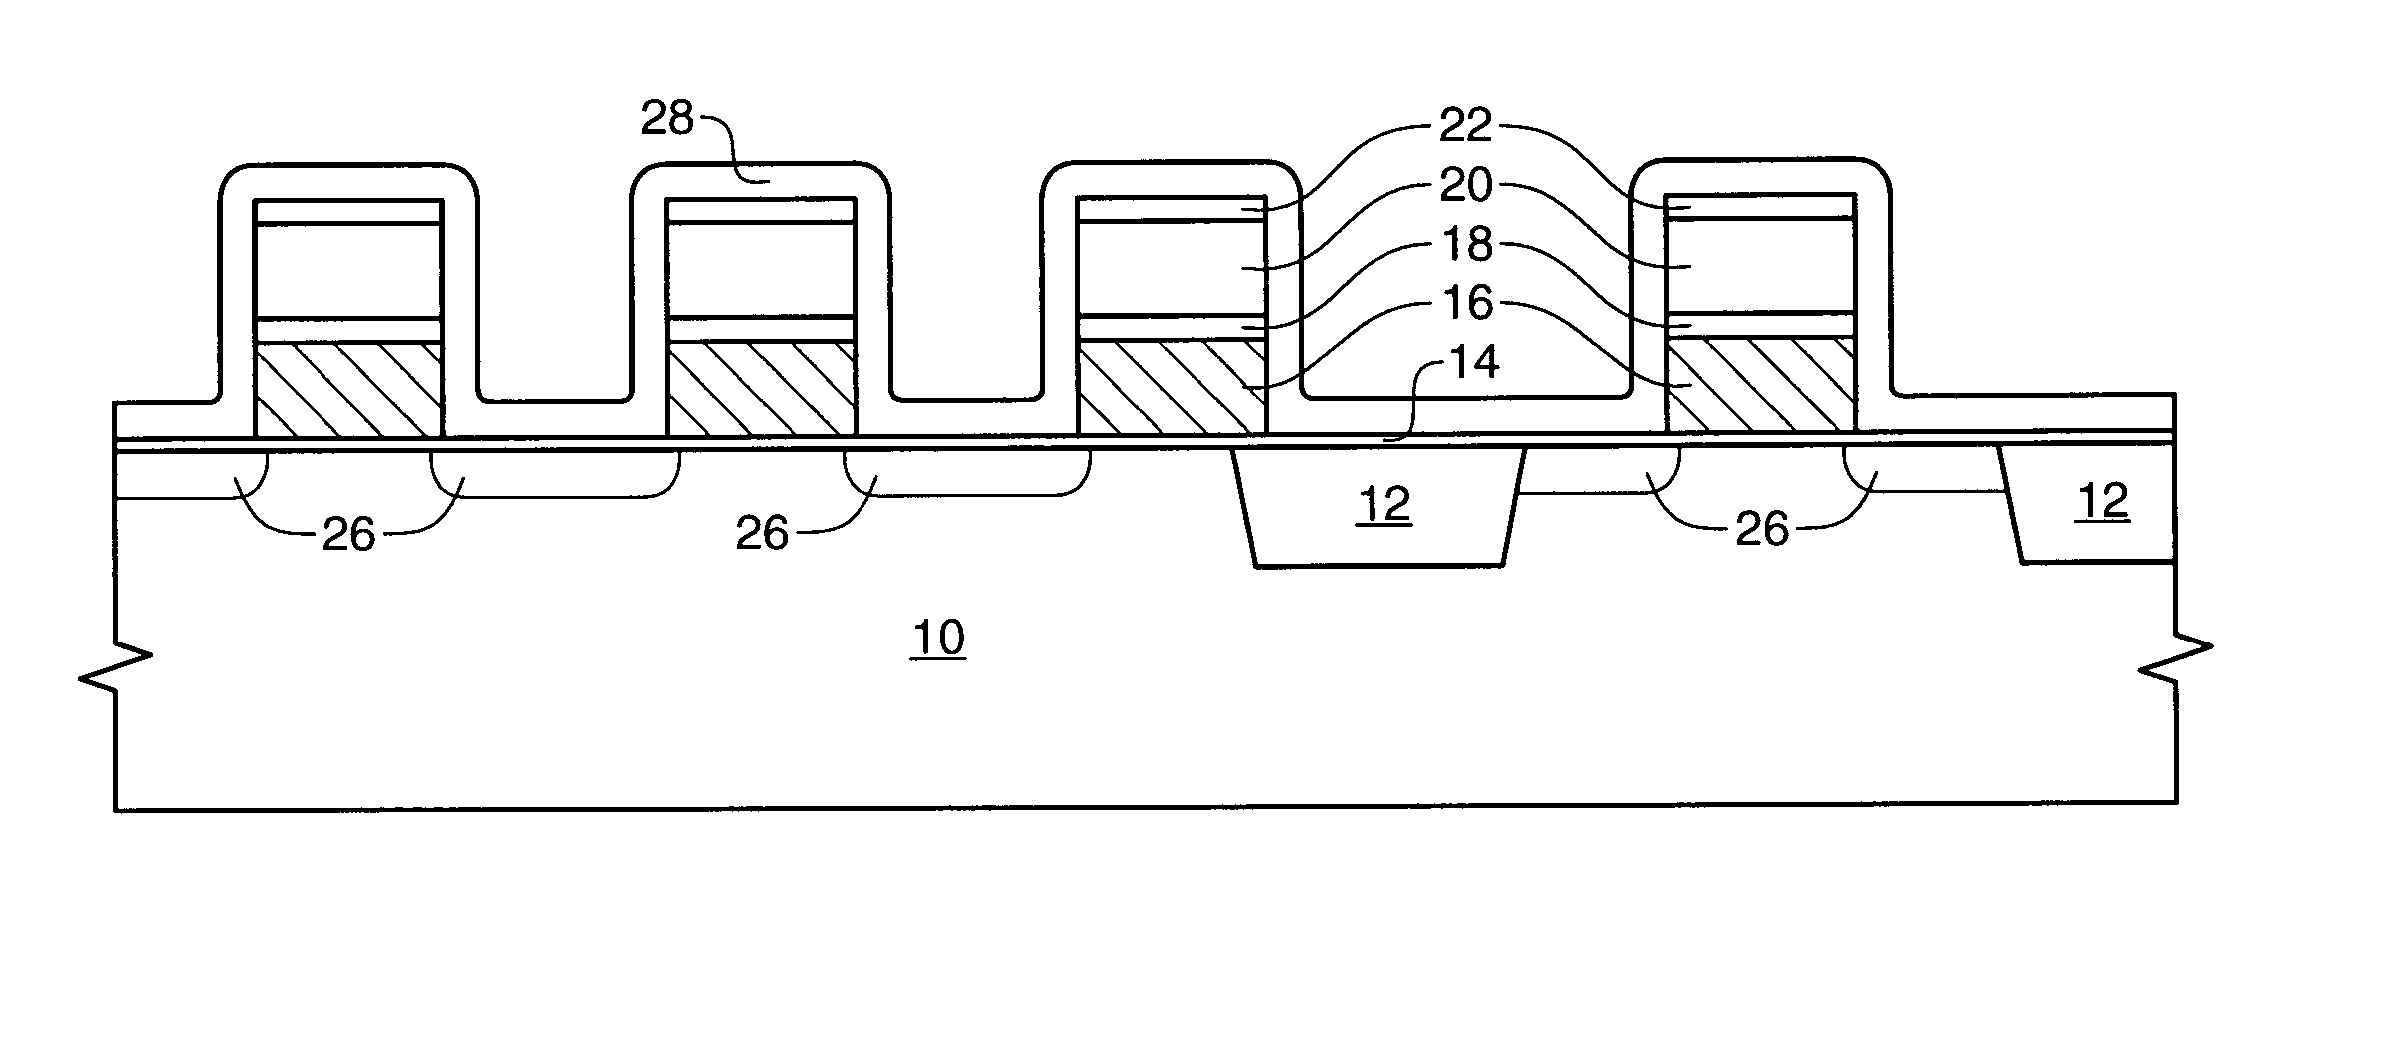 Method and structure for a self-aligned silicided word line and polysilicon plug during the formation of a semiconductor device